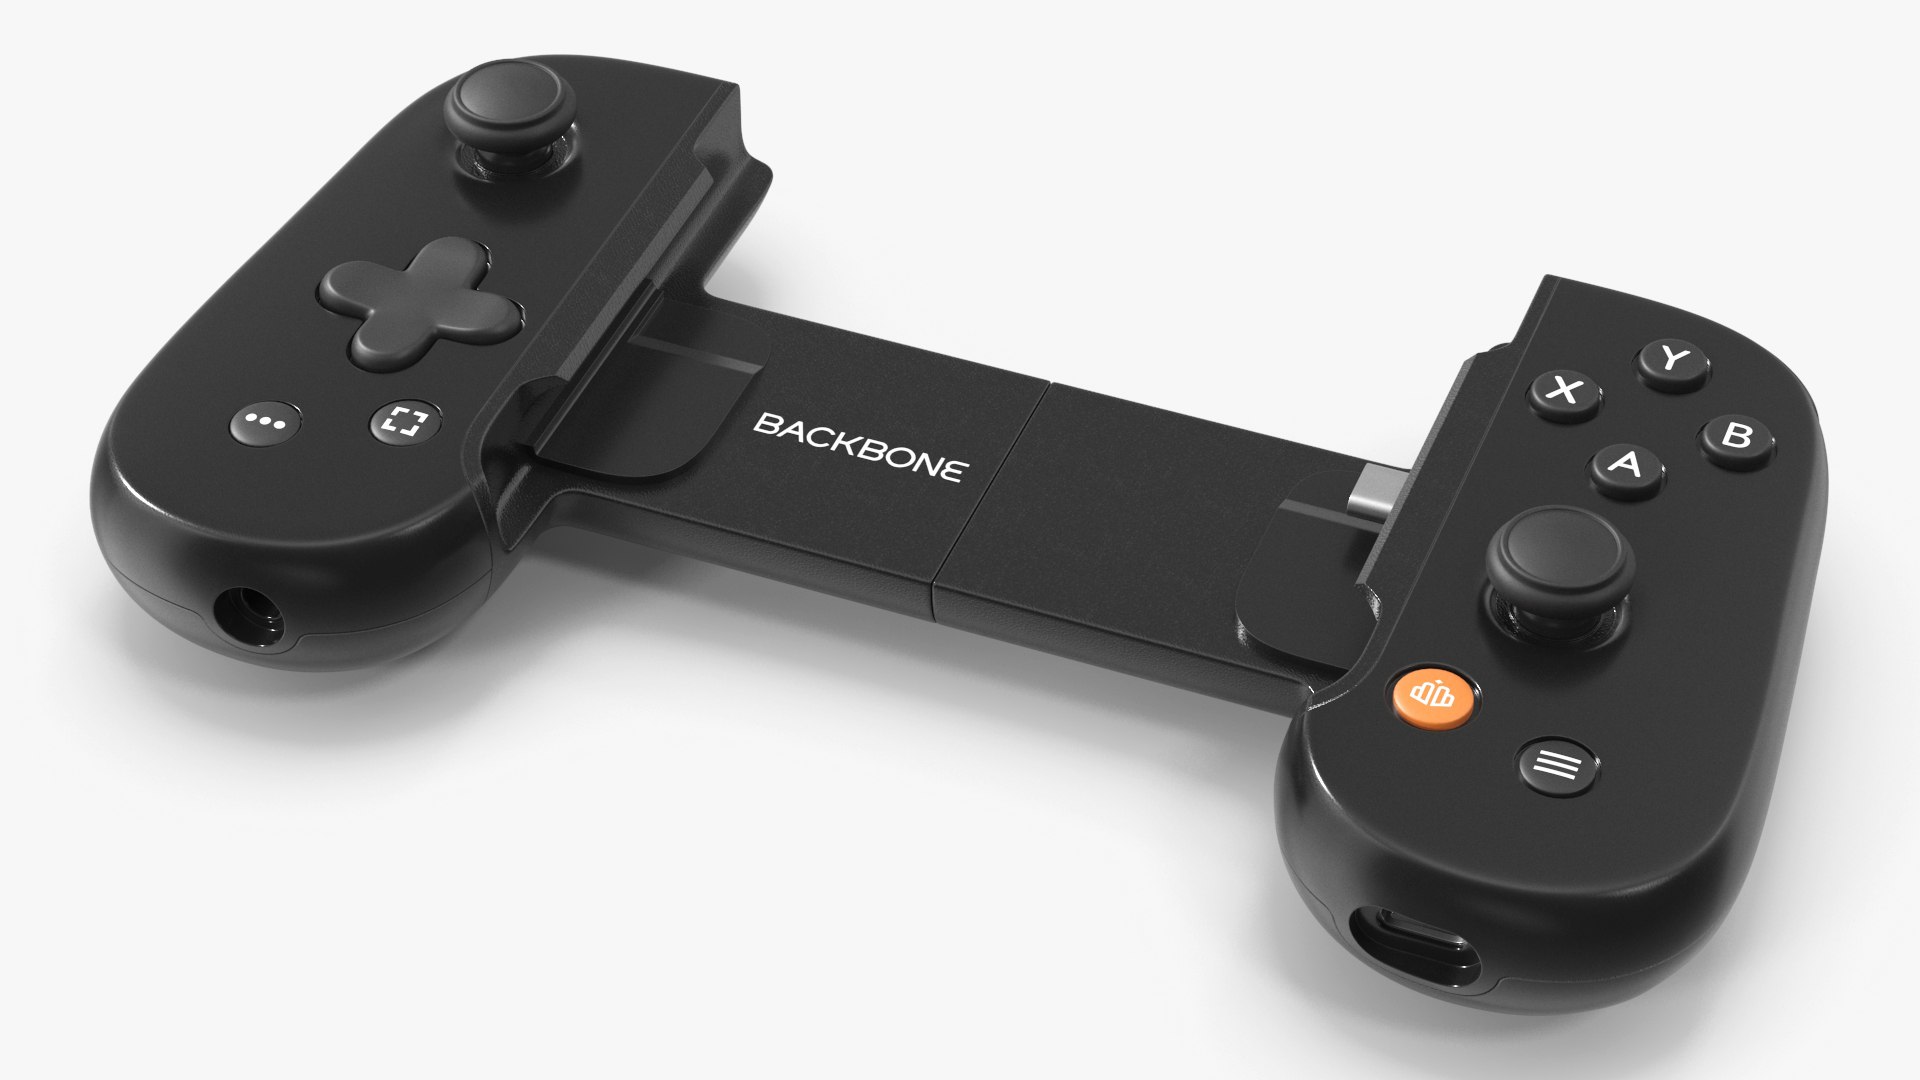 Backbone - One Mobile Gaming Controller for iPhone - Black With